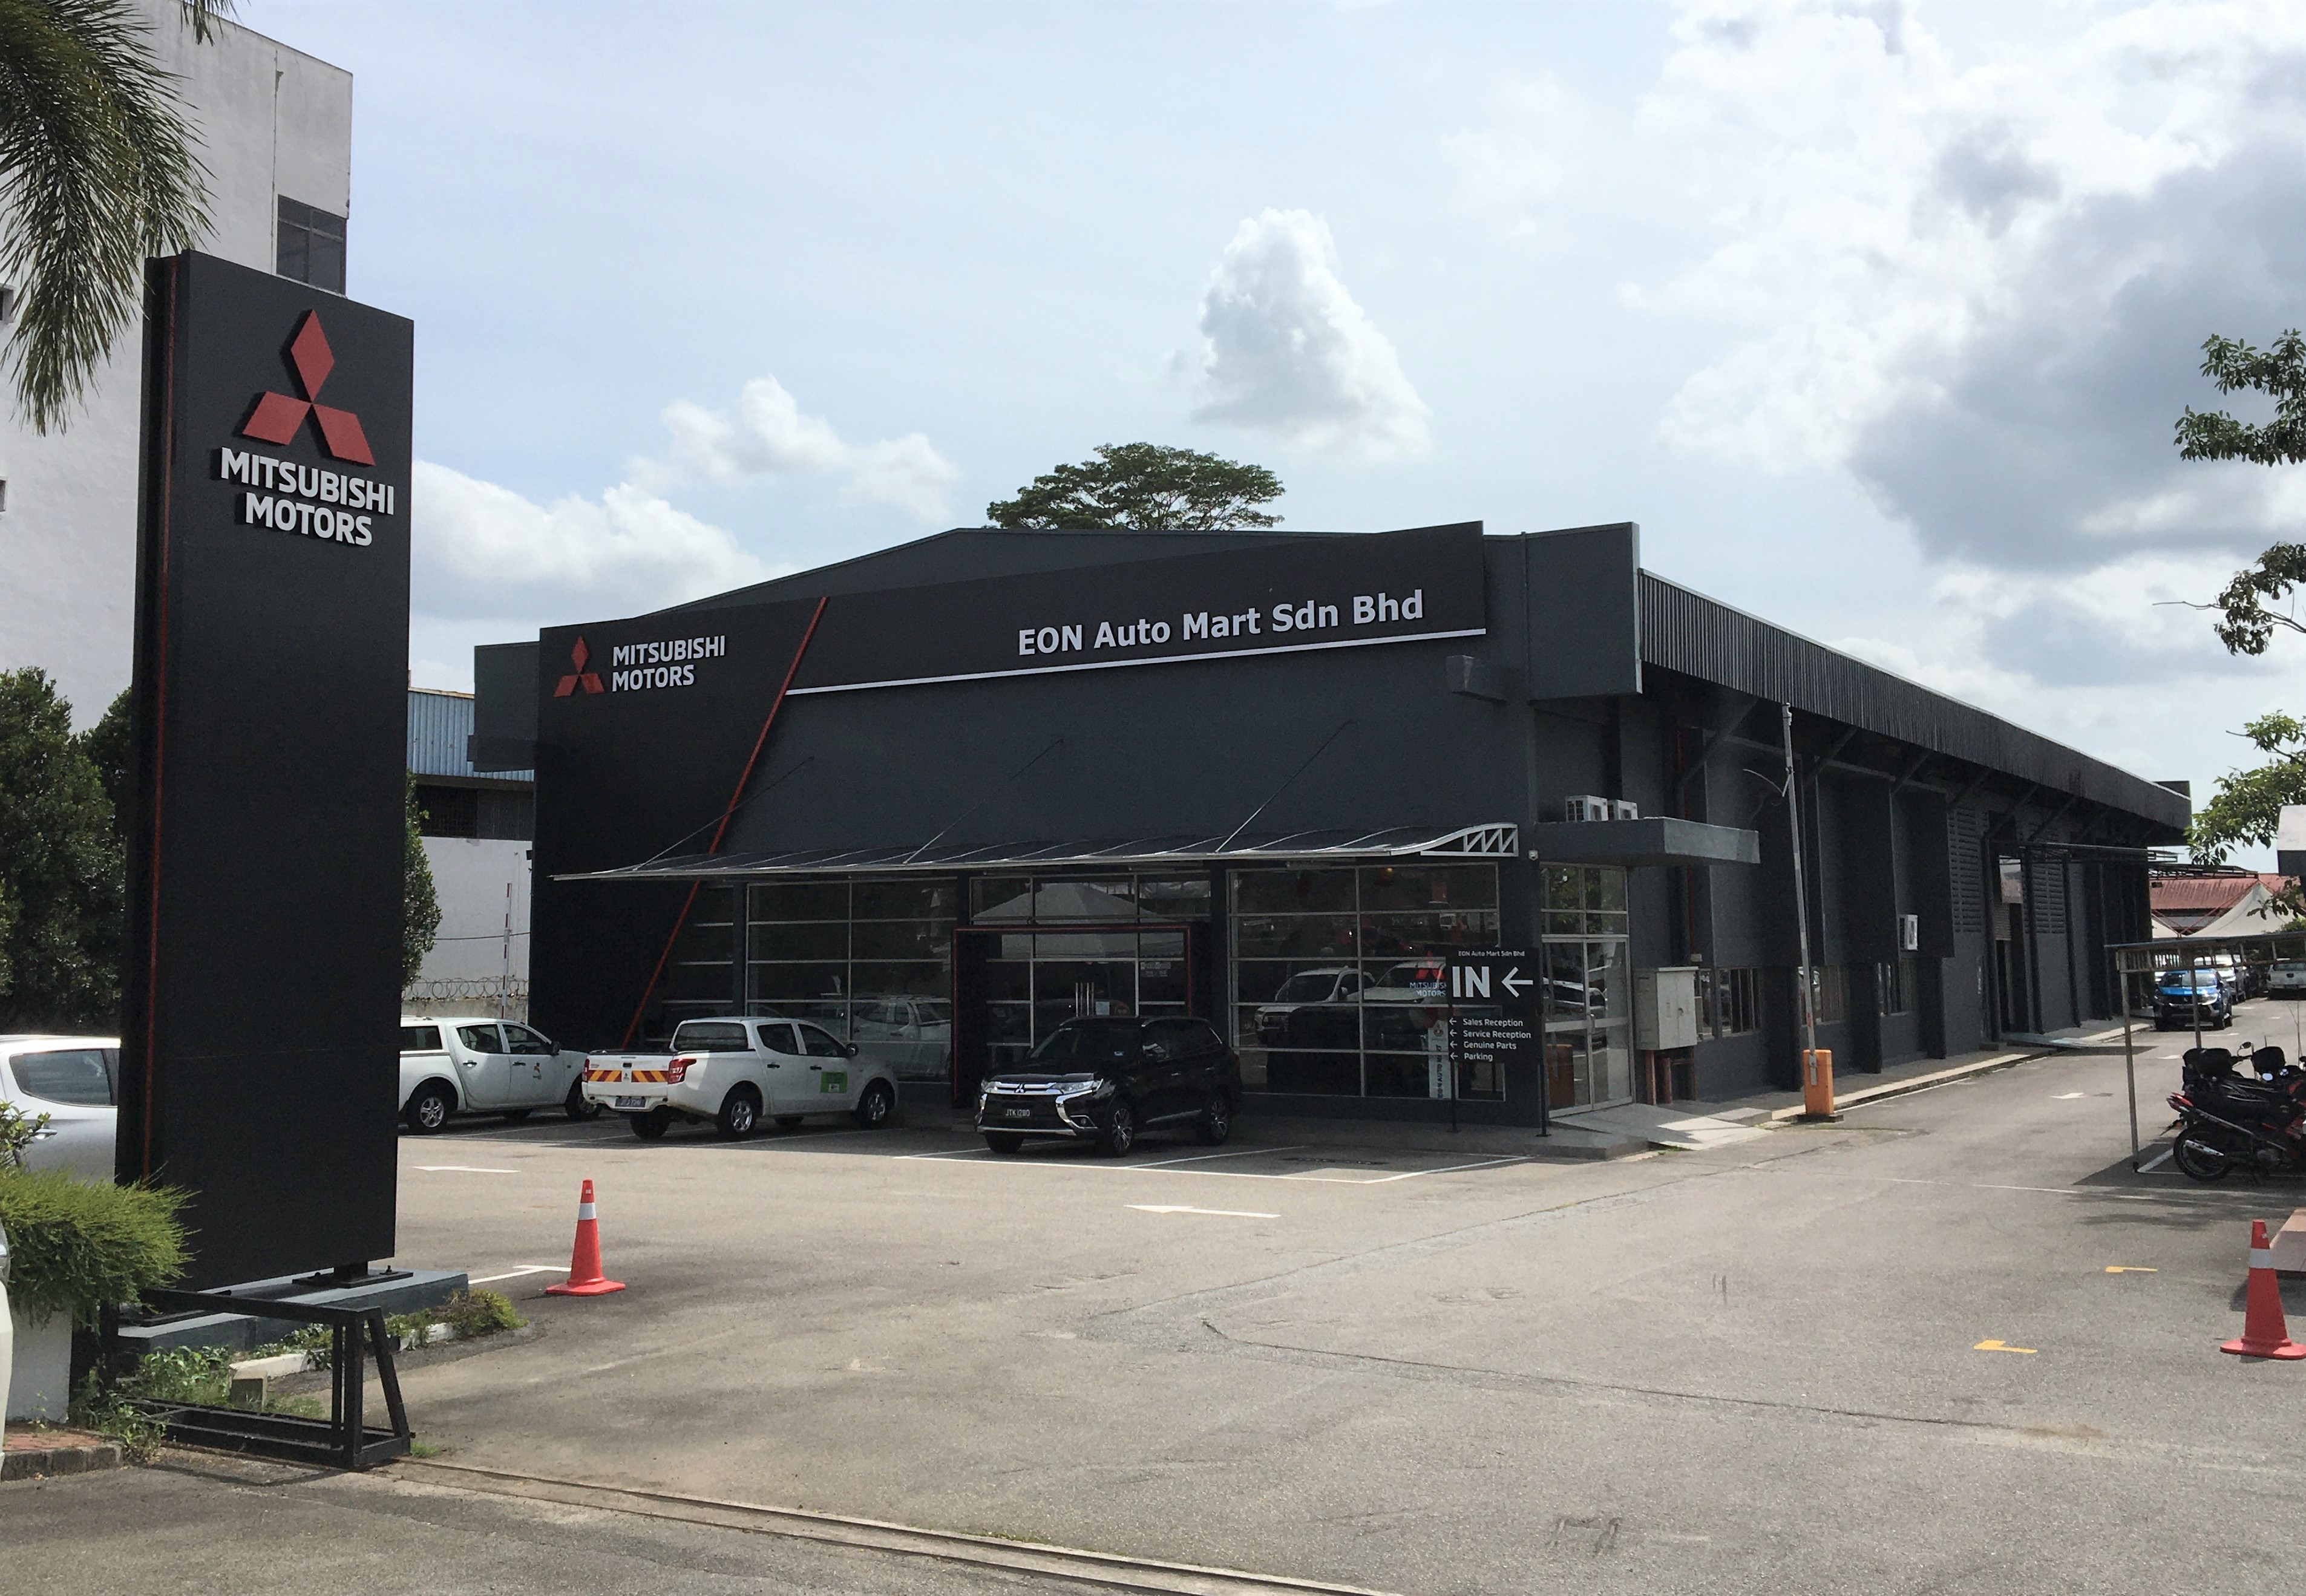 Mitsubishi sales and service back in business